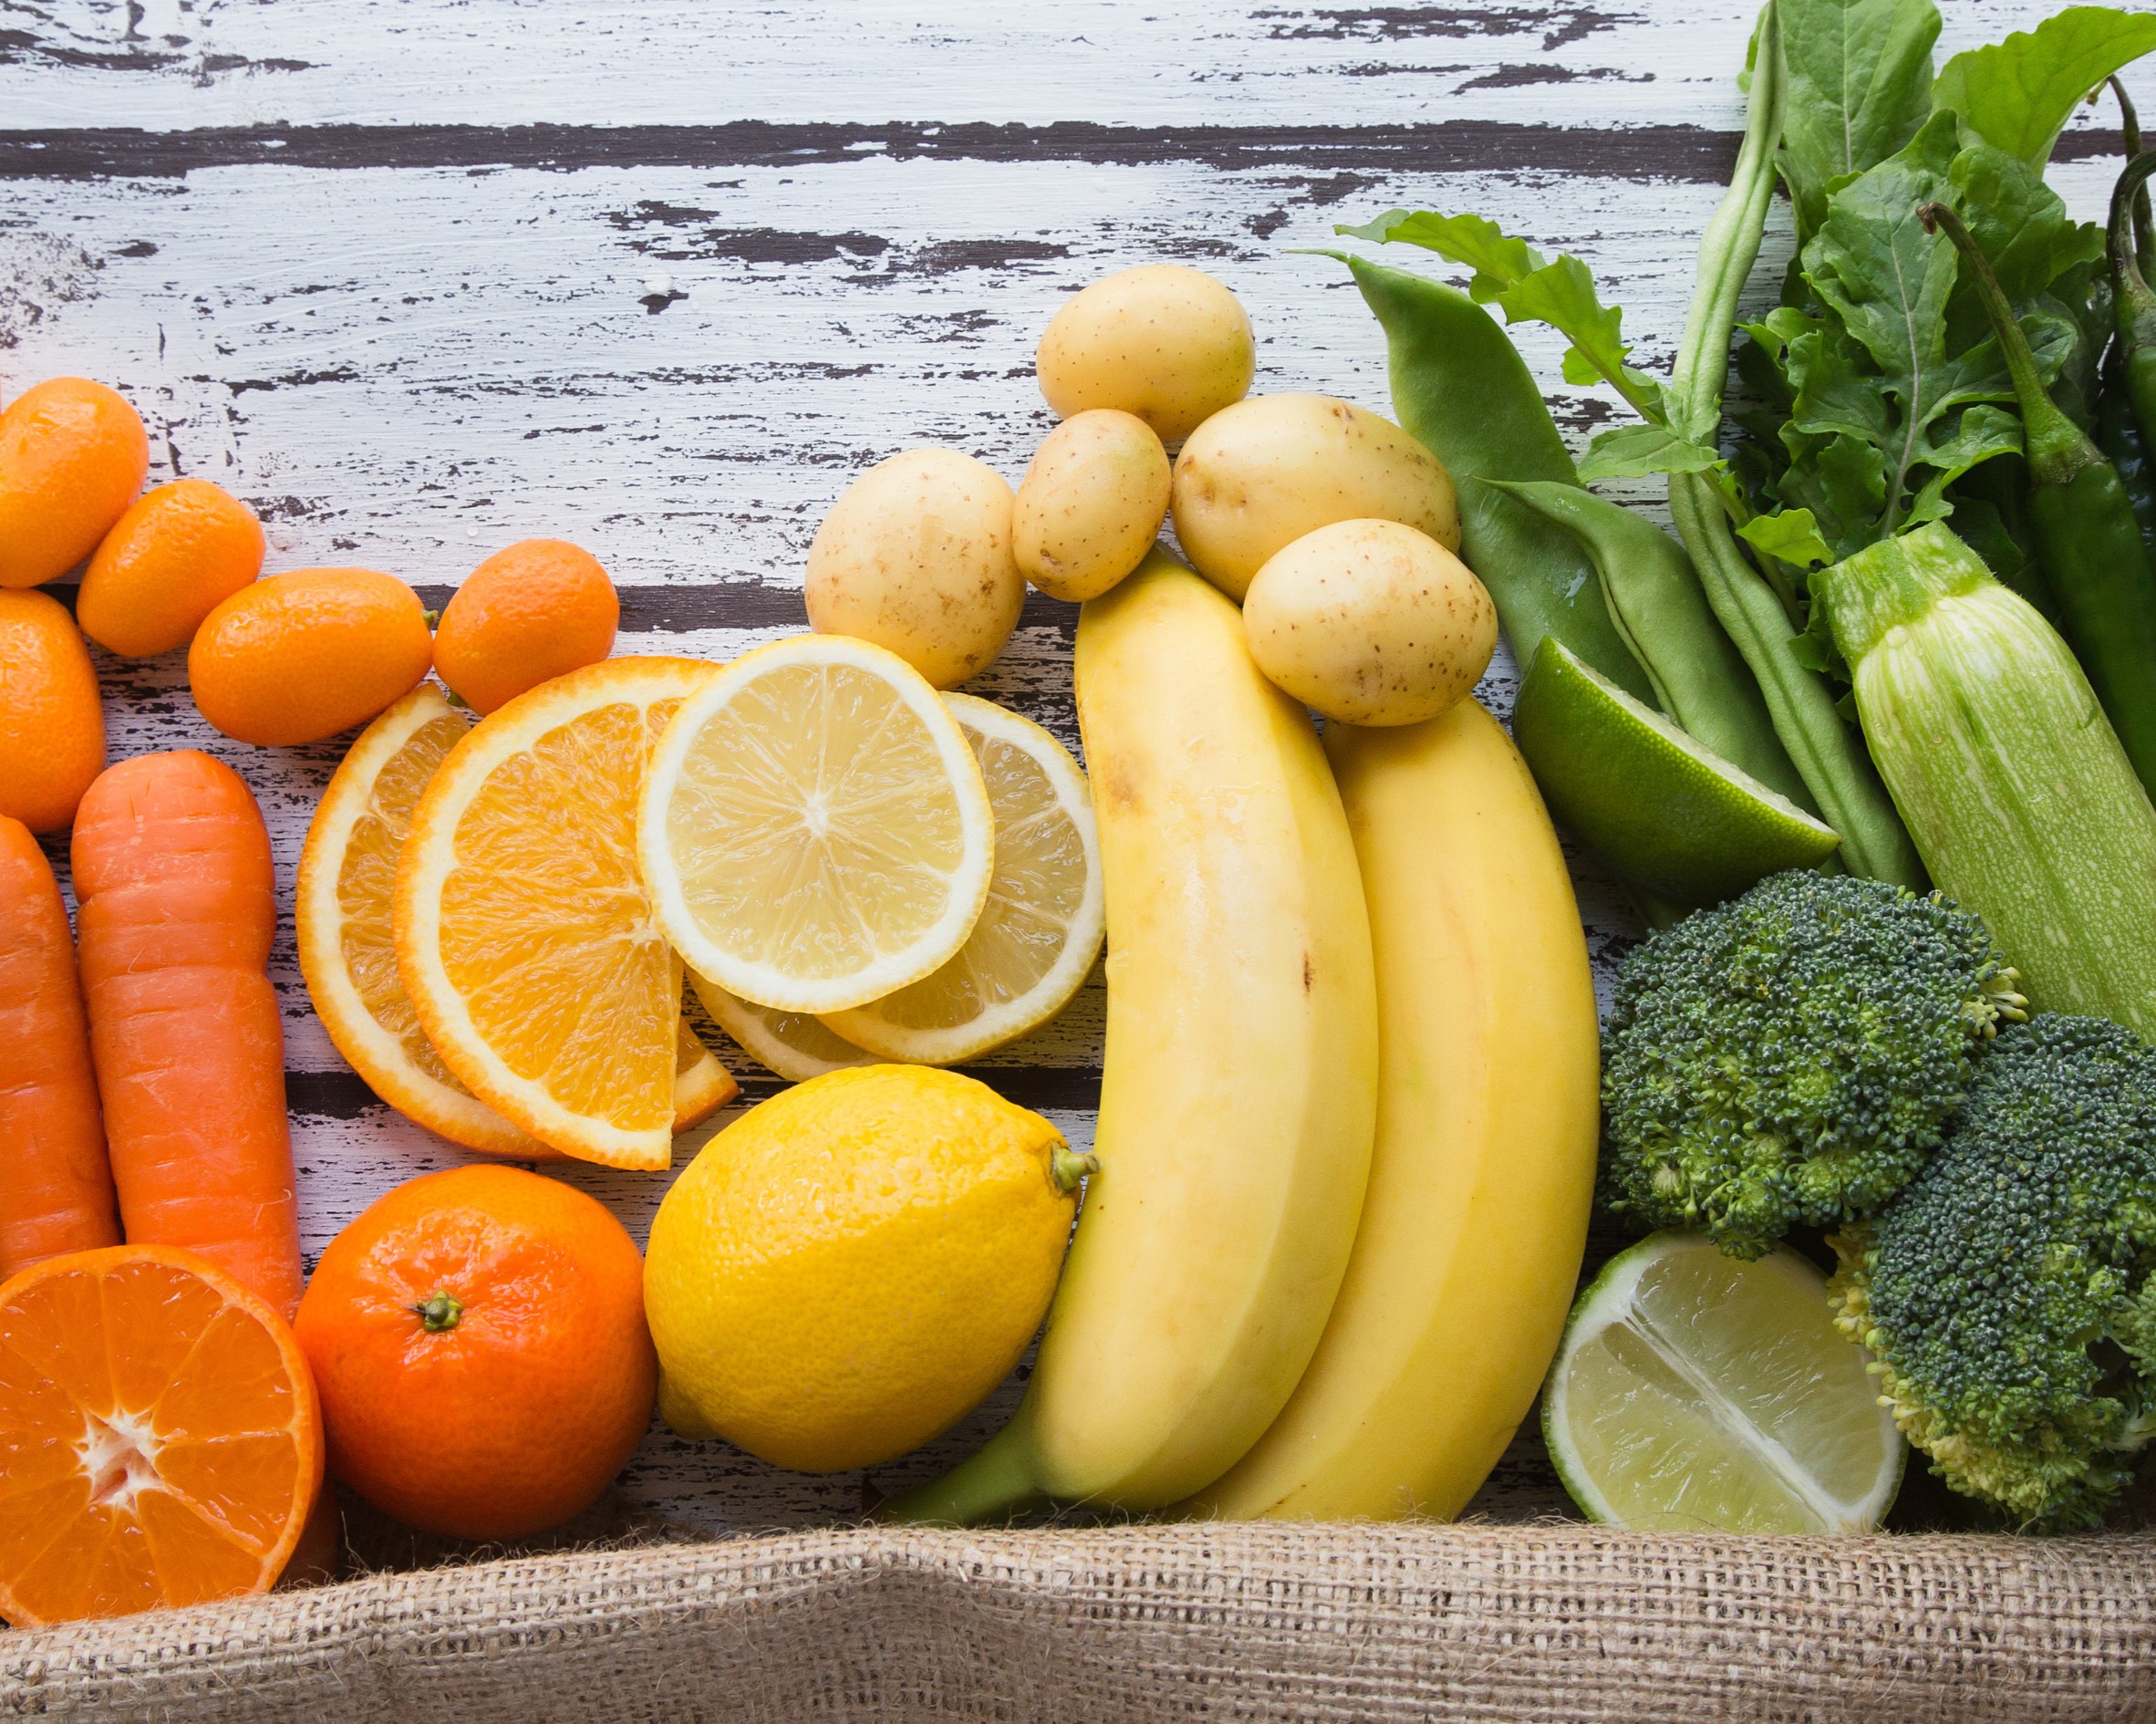 What foods can help recover from injury